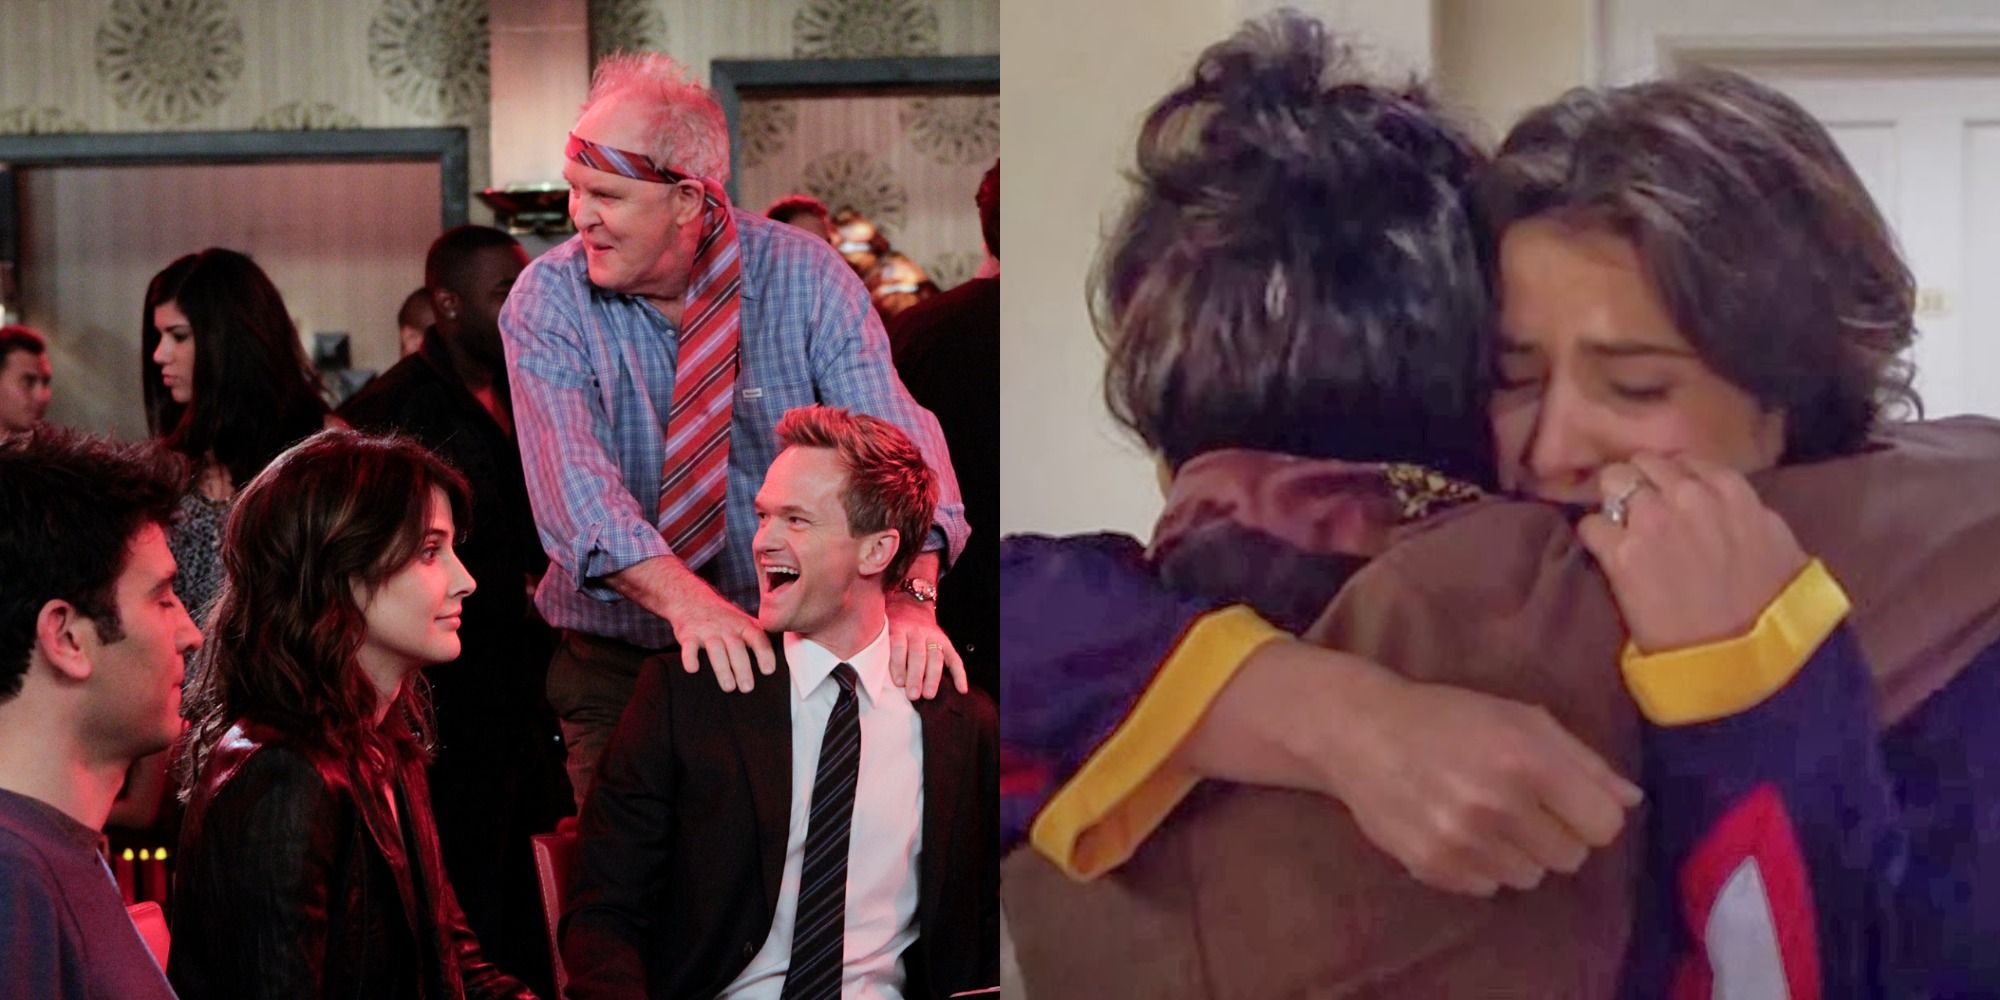 Split image of Barnet and Jerome drinking together, and Robin hugging her mother